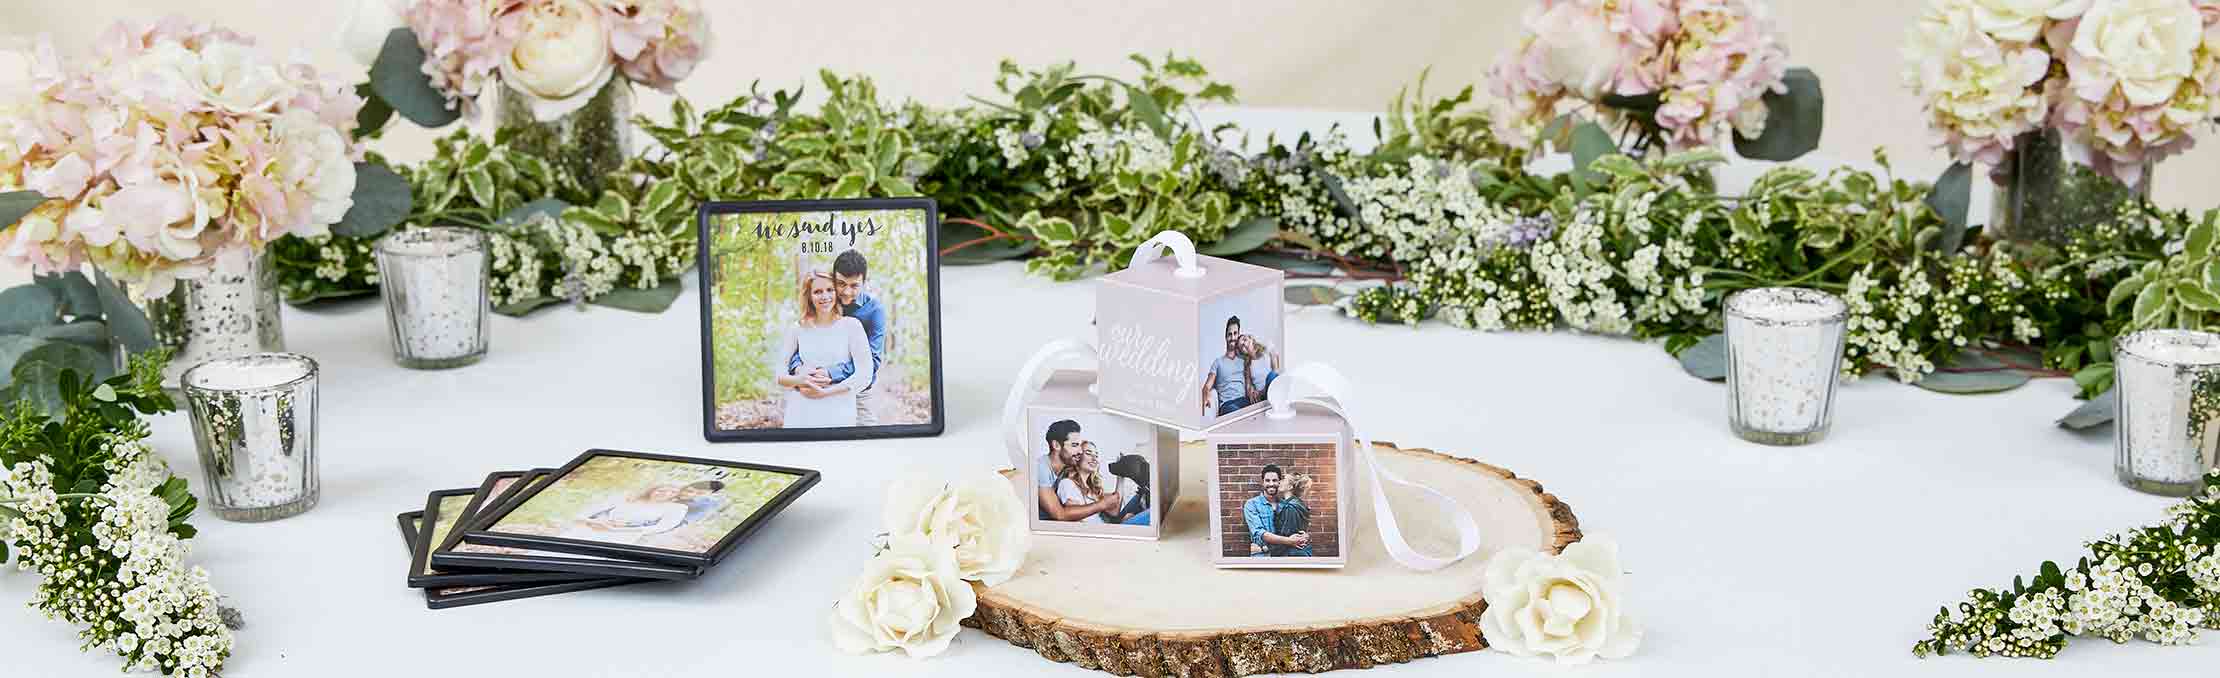 Ideas for Wedding Party Favors